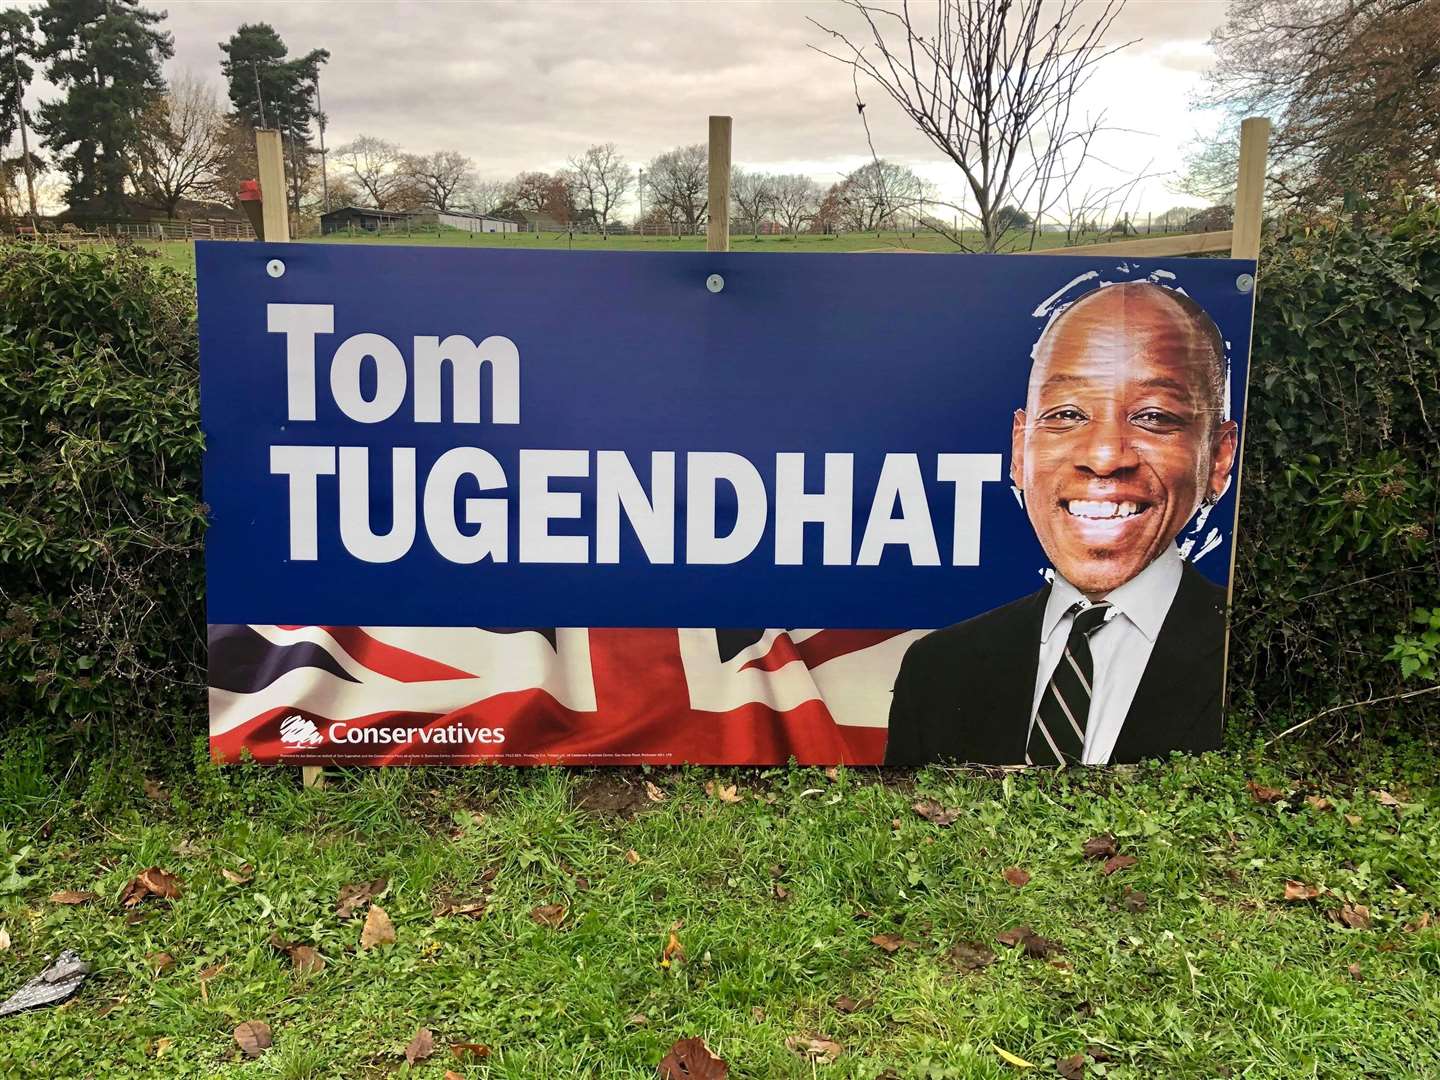 Ian Wright is the latest face to replace Tom Tugendhat